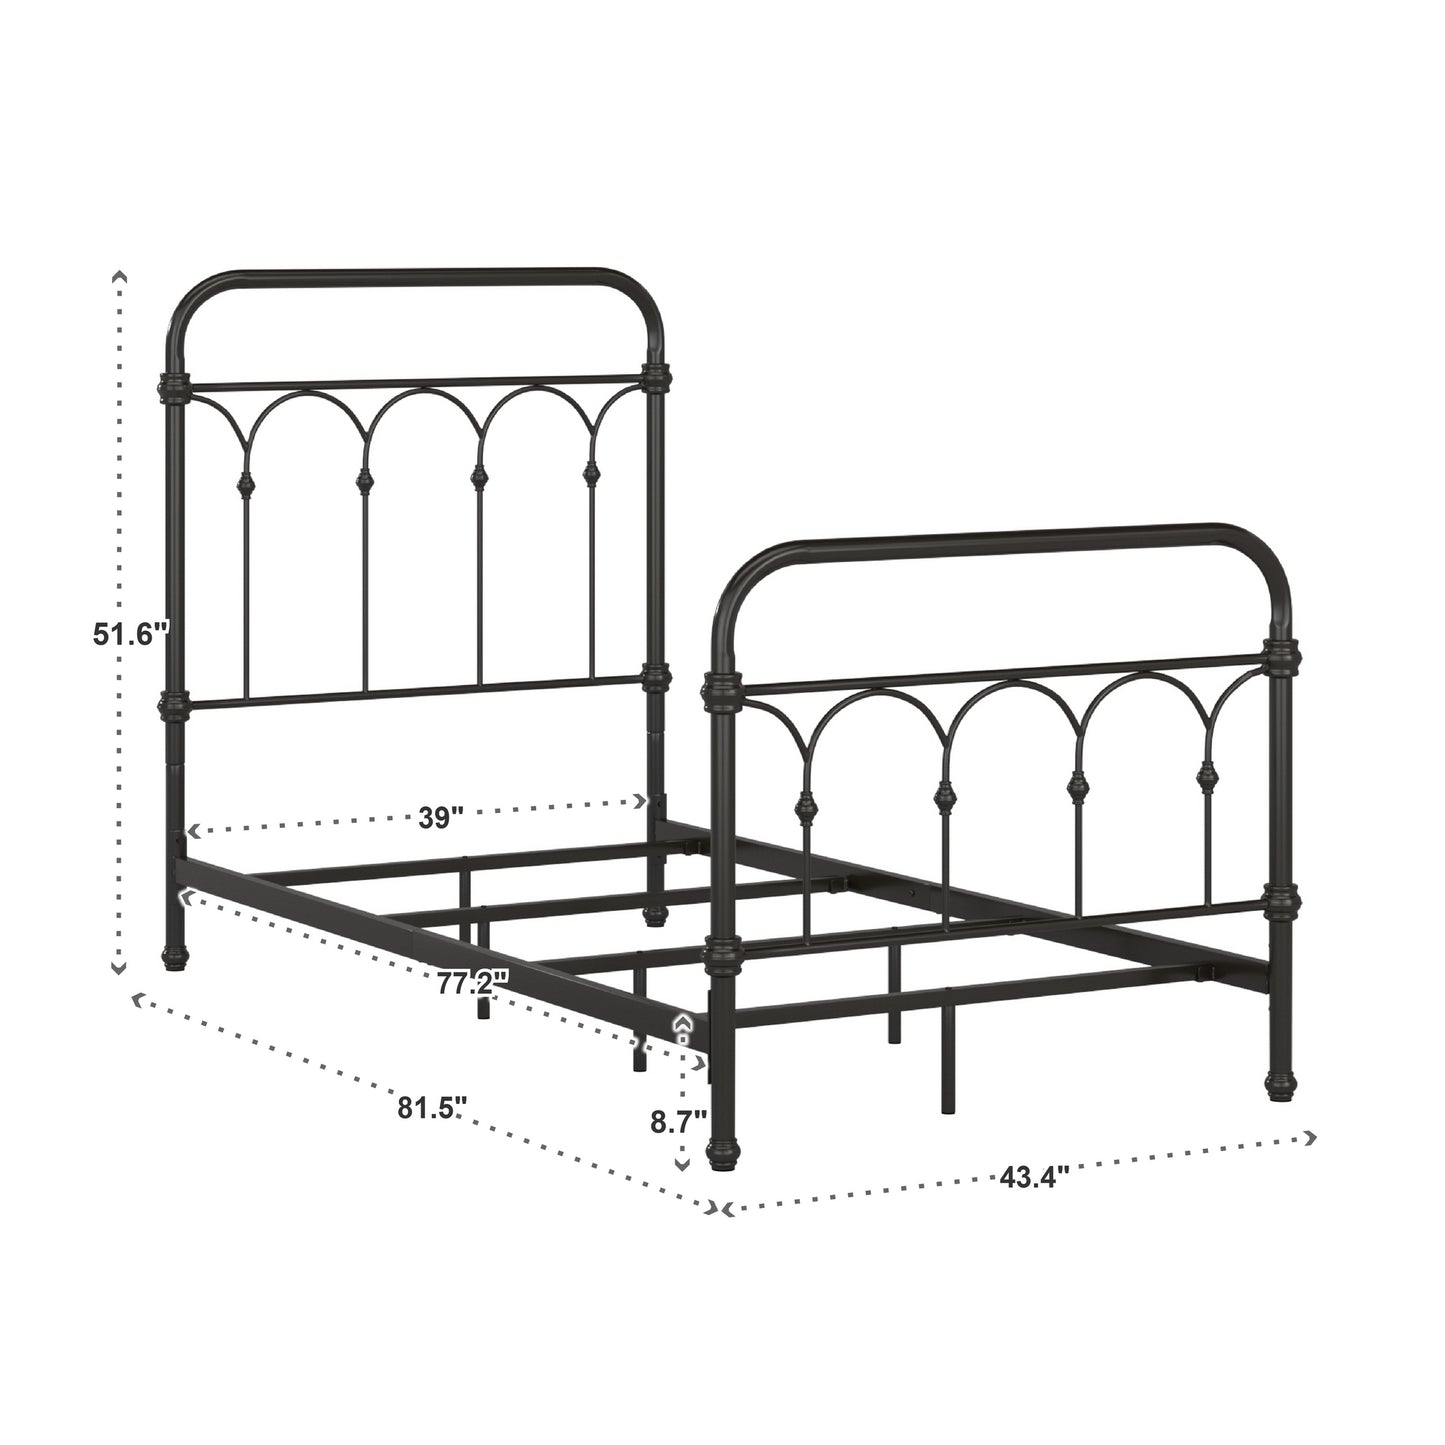 Casted Knot Metal Bed - Dark Bronze, Twin (Twin Size)